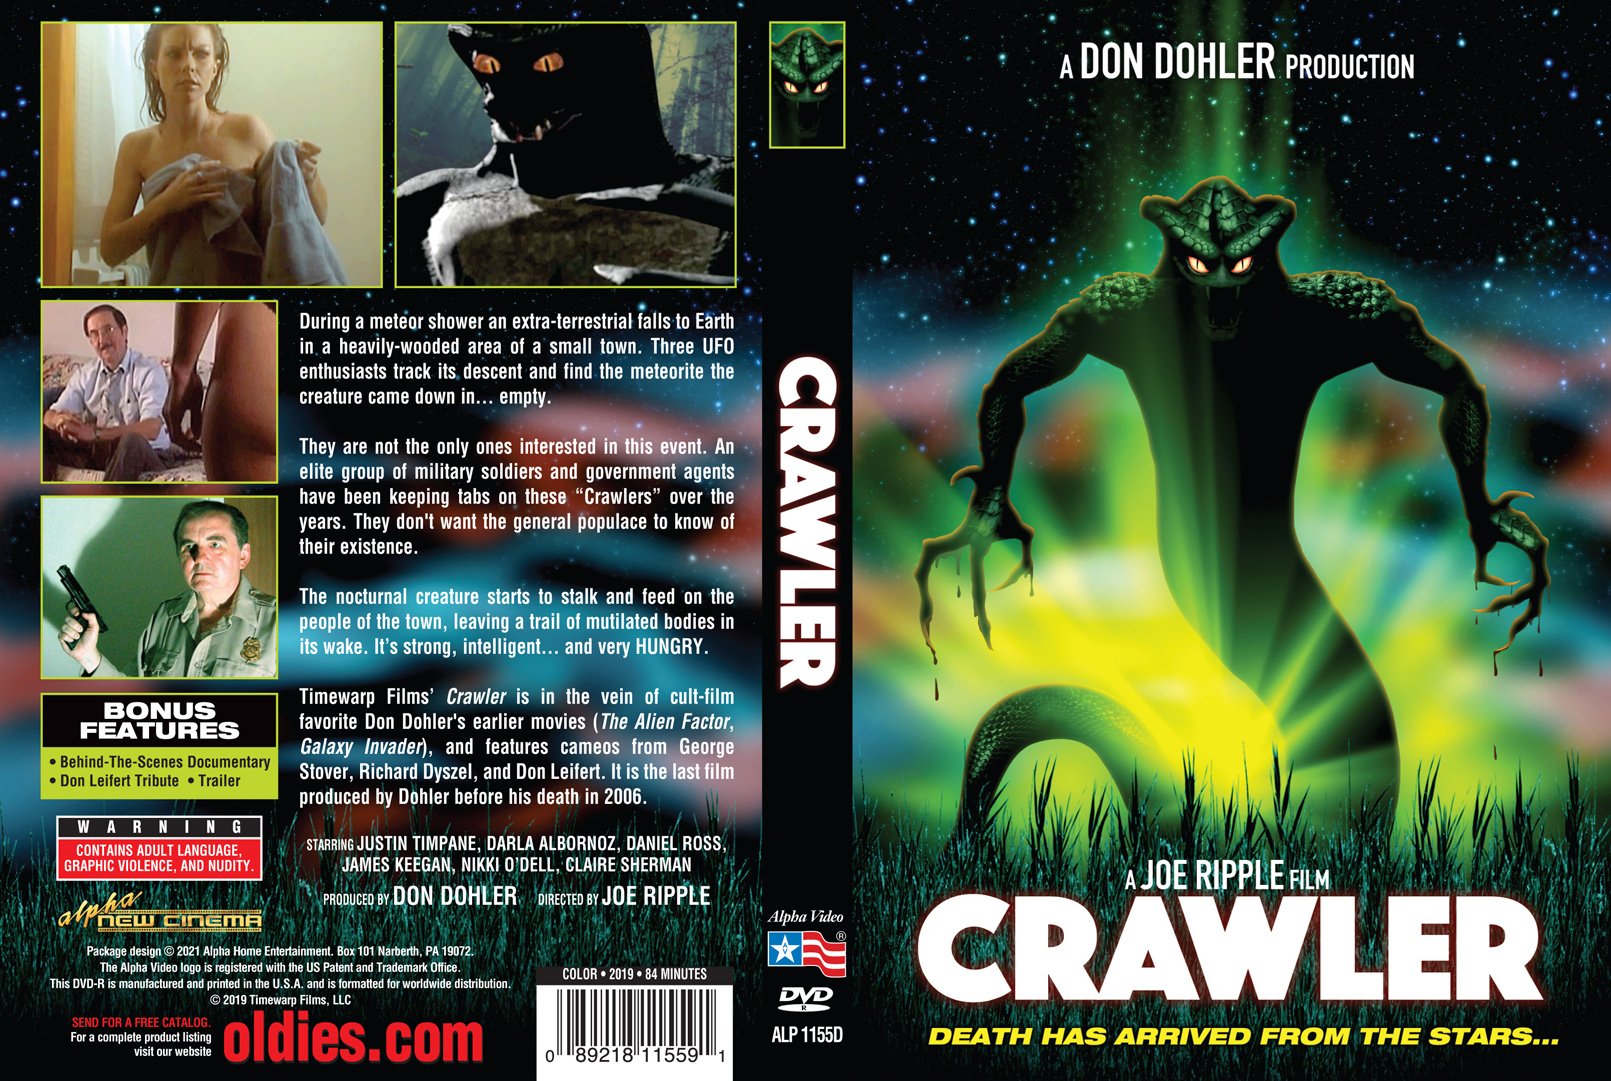 Crawler: a tribute to The Descent